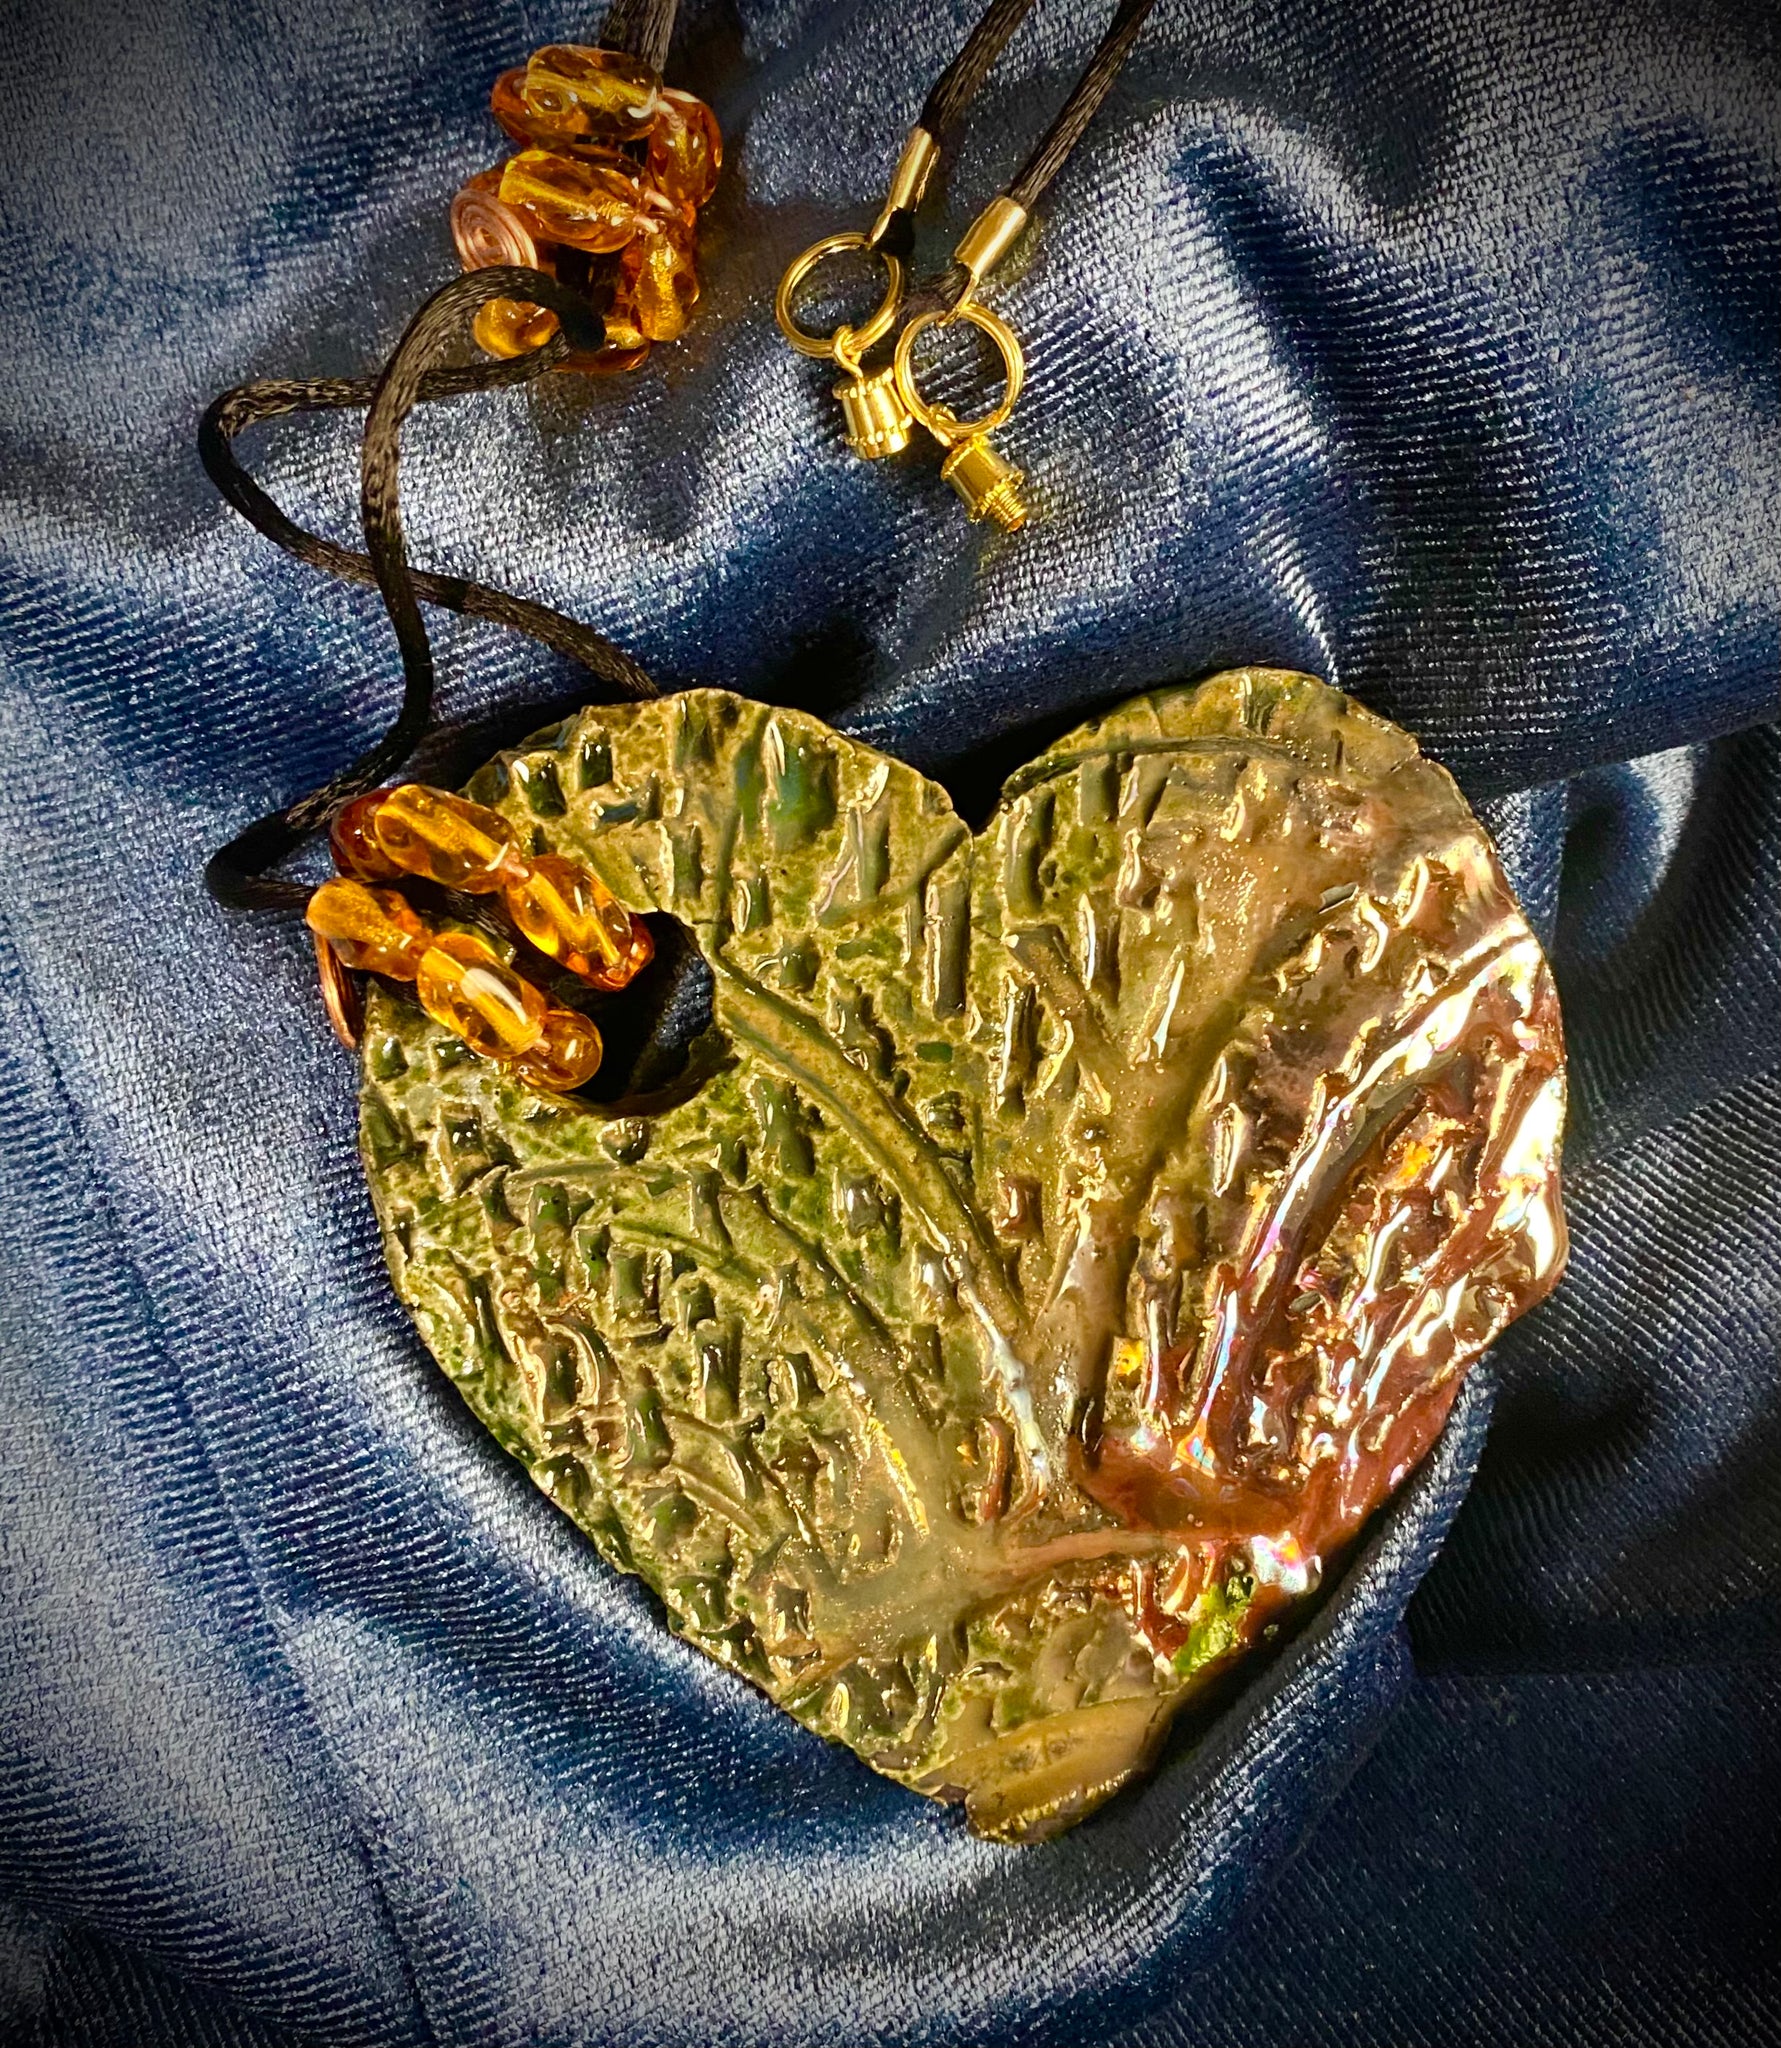 Have A Heart ! Each heart pendant is handmade with love! It is 3"x 3" and weighs approx. 3ozs. This pendant has an alligator green and gold metallic raku glazes that renders a unique translucent  patina. The heart  has a textured  pattern. It holds a spiral of amber mini beads on a spiral copper wire. This pendant has a nice 12" black suede cord!